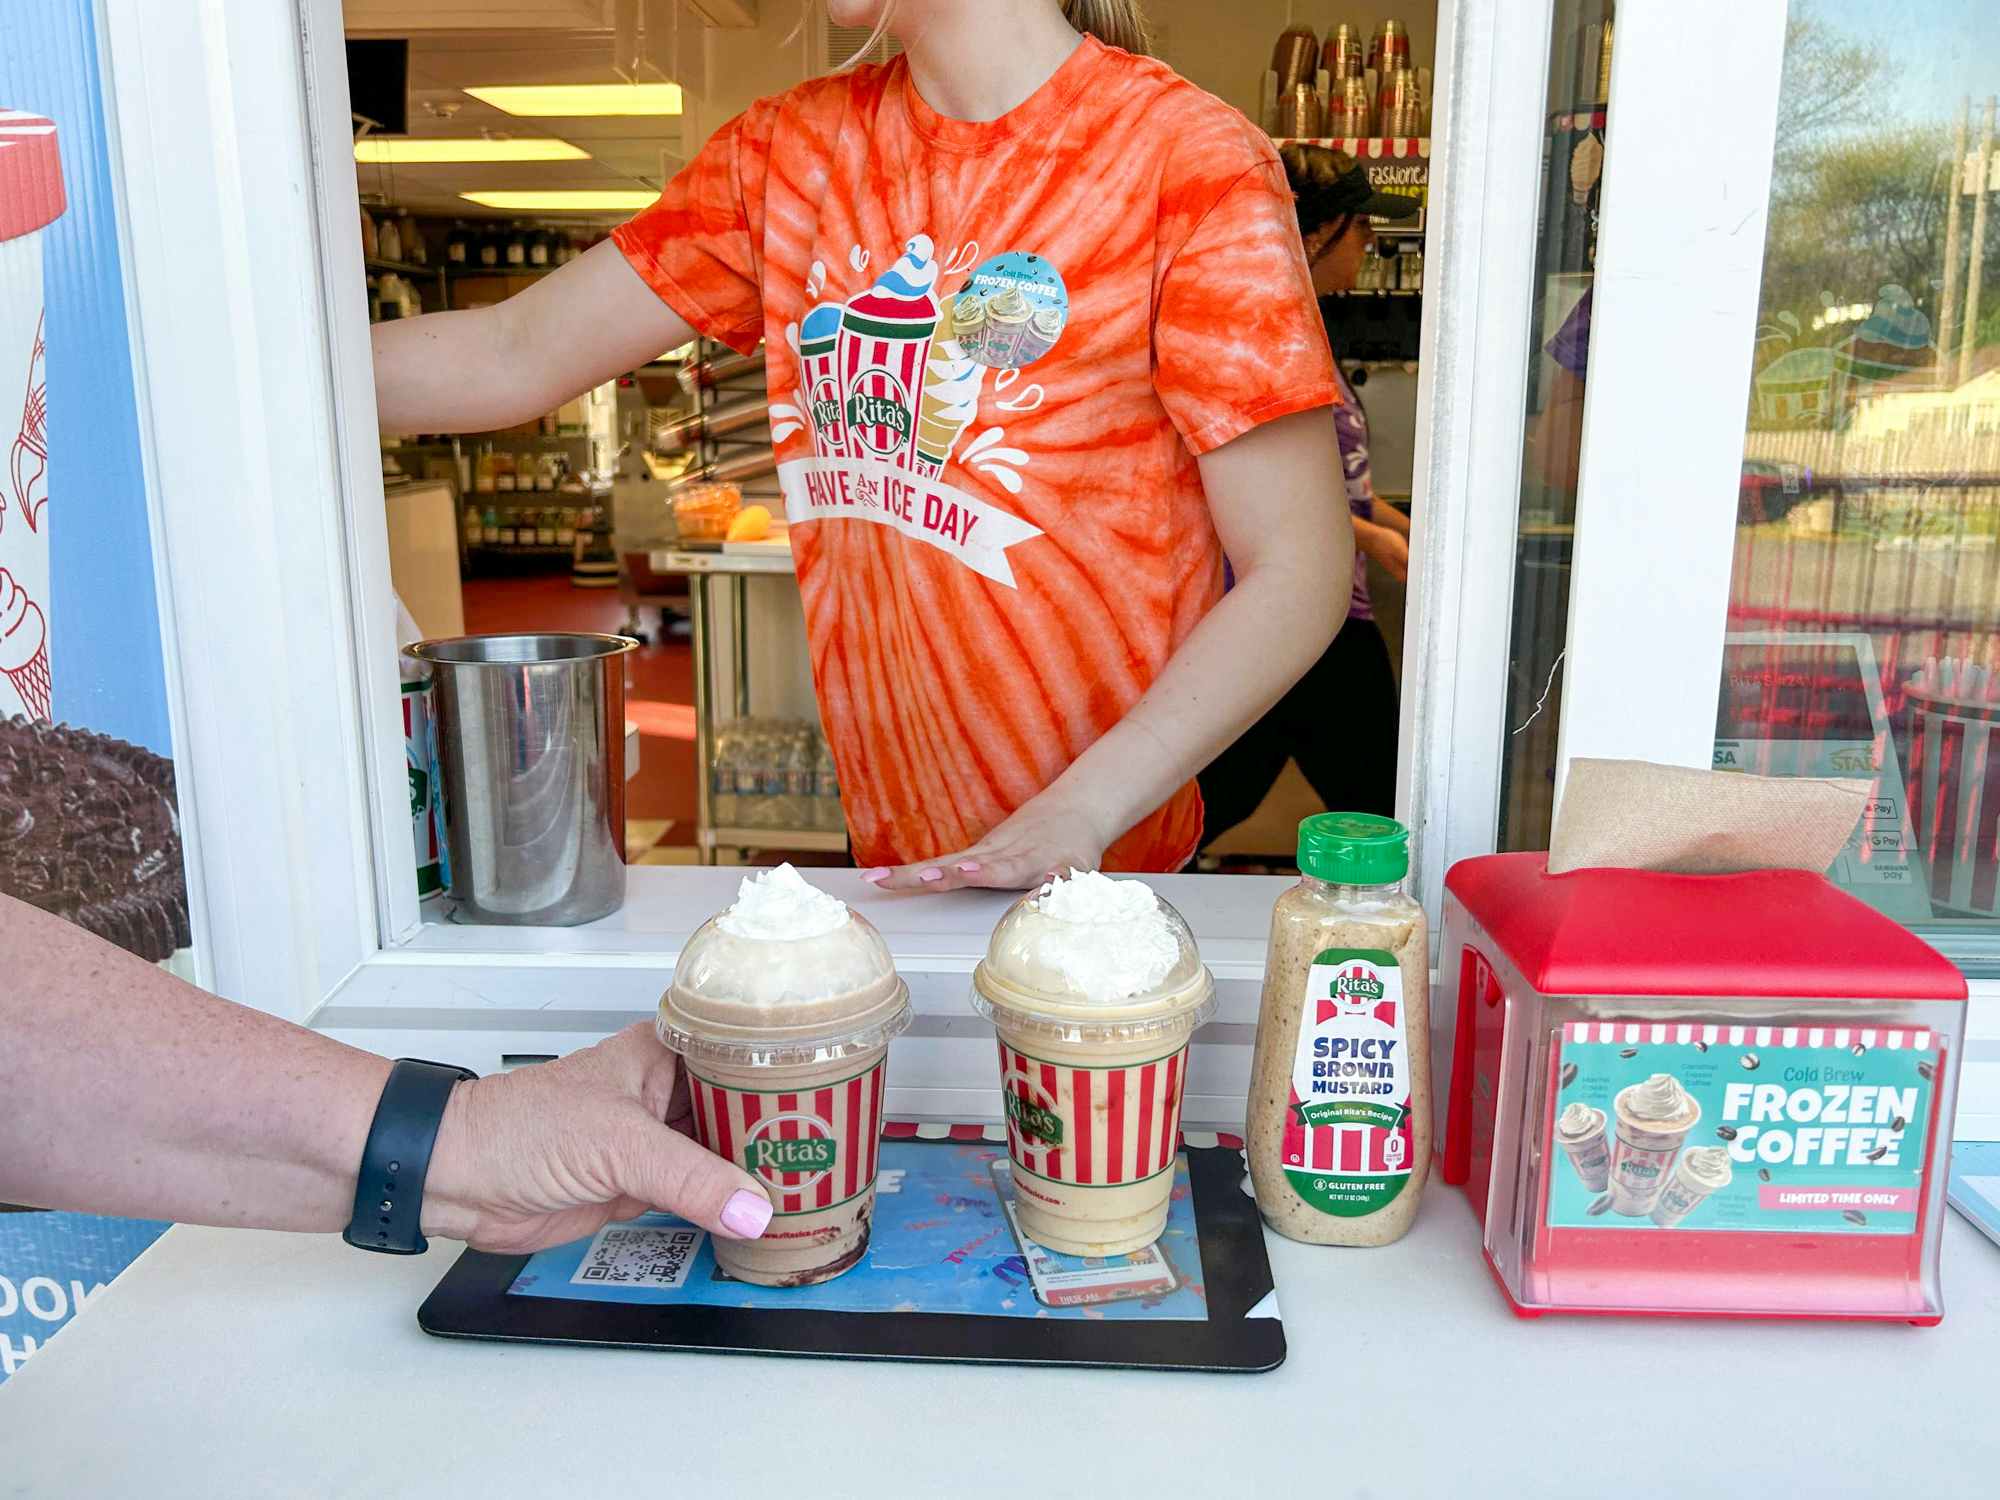 A Rita's employee serving some frozen coffees to customers